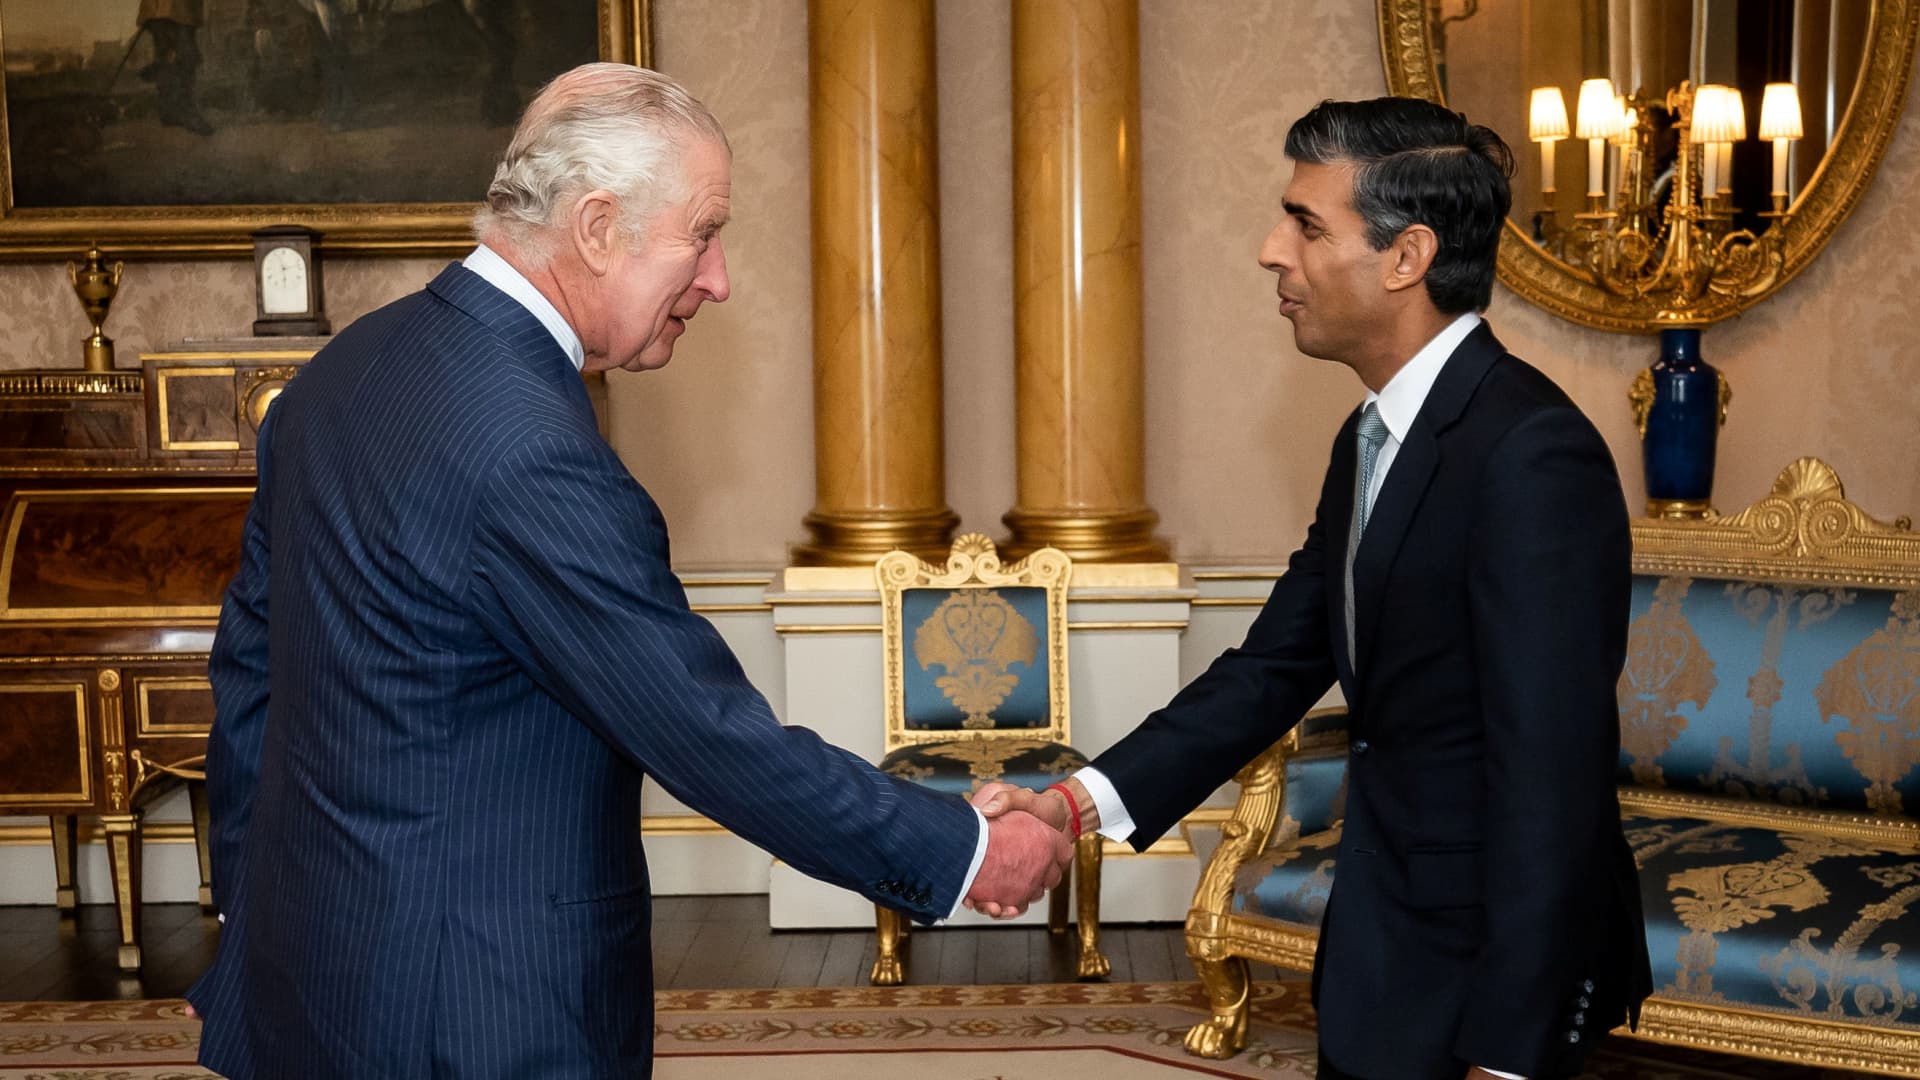 King Charles III welcomes Rishi Sunak during an audience at Buckingham Palace, London, where he invited the newly elected leader of the Conservative Party to become Prime Minister and form a new government. Picture date: Tuesday October 25, 2022. 